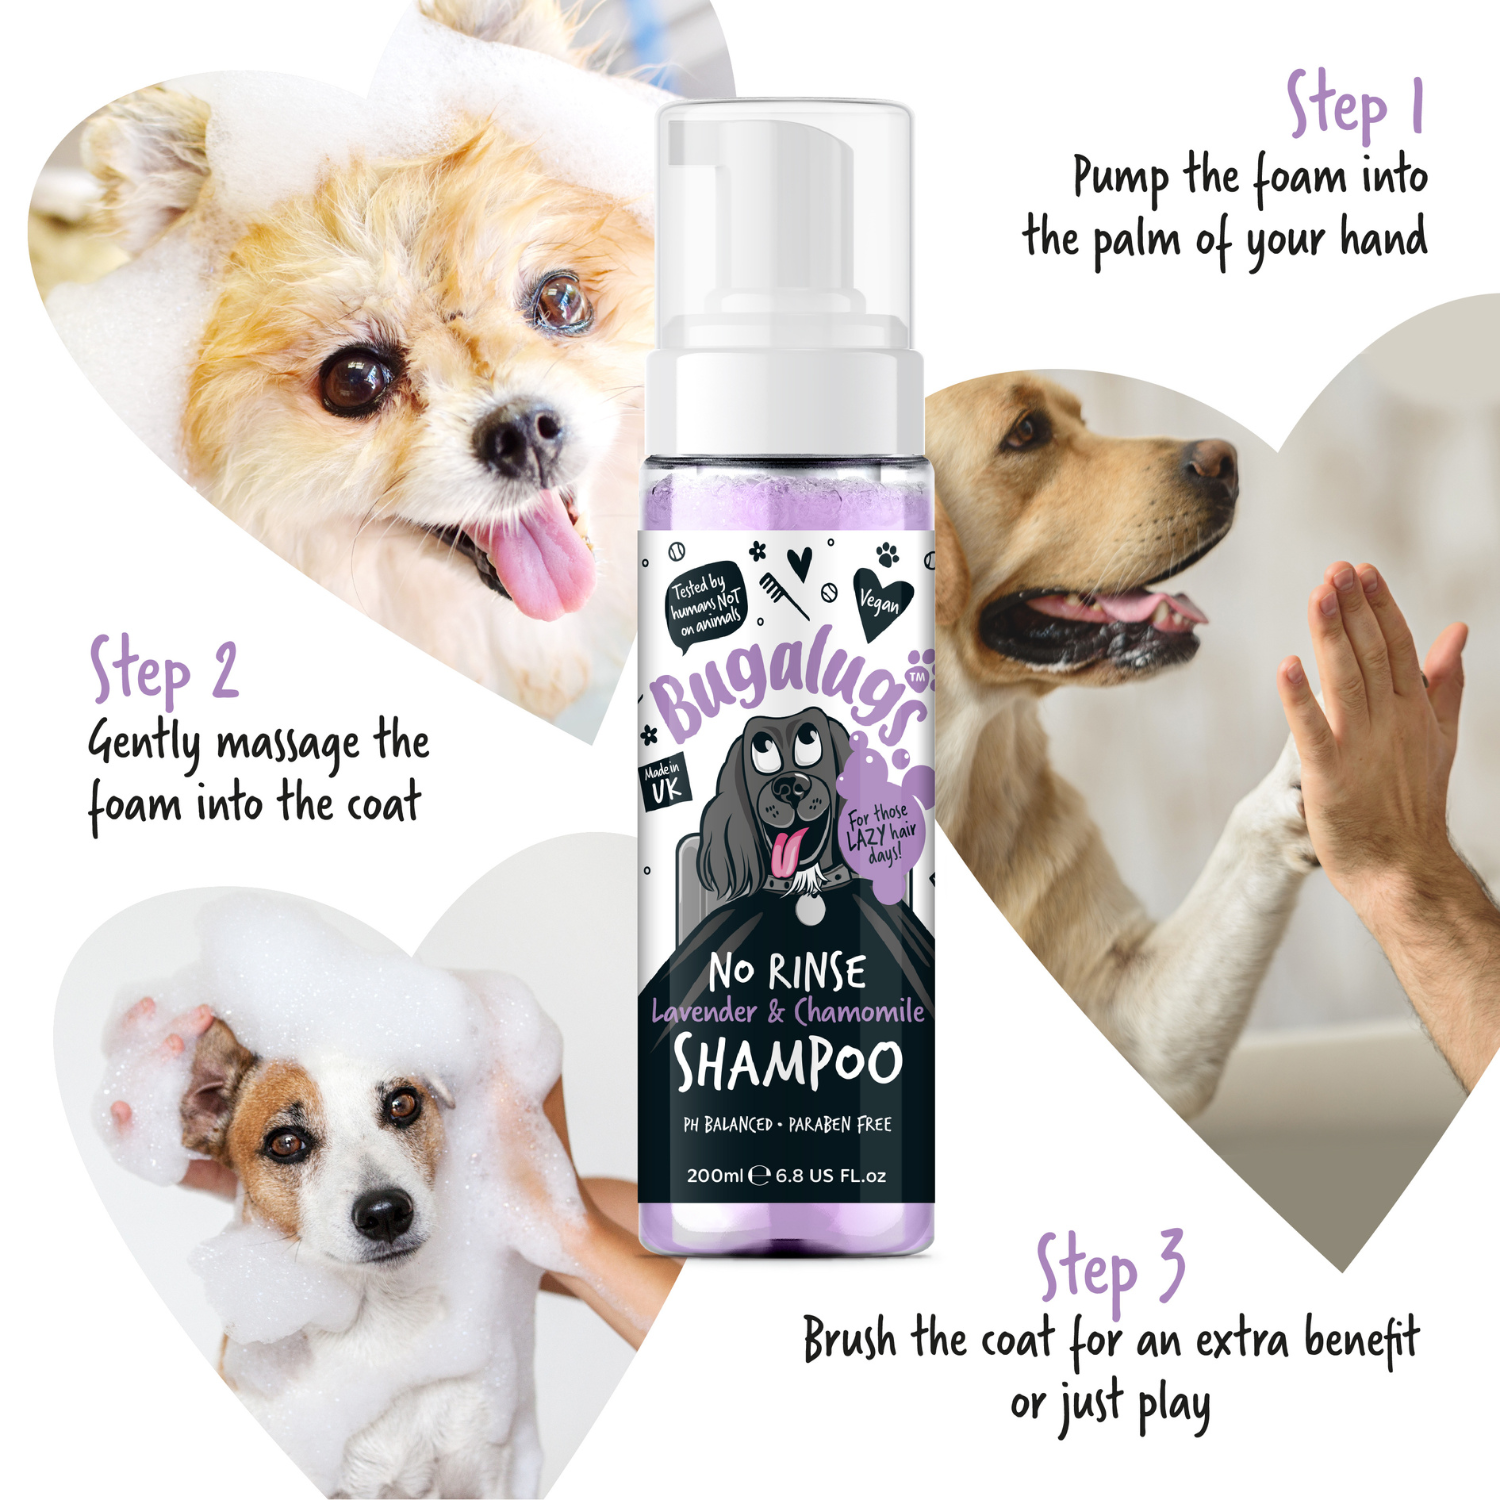 Bugalugs No Rinse Lavender and Chamomile Shampoo for Dogs - How to use - 3 easy steps